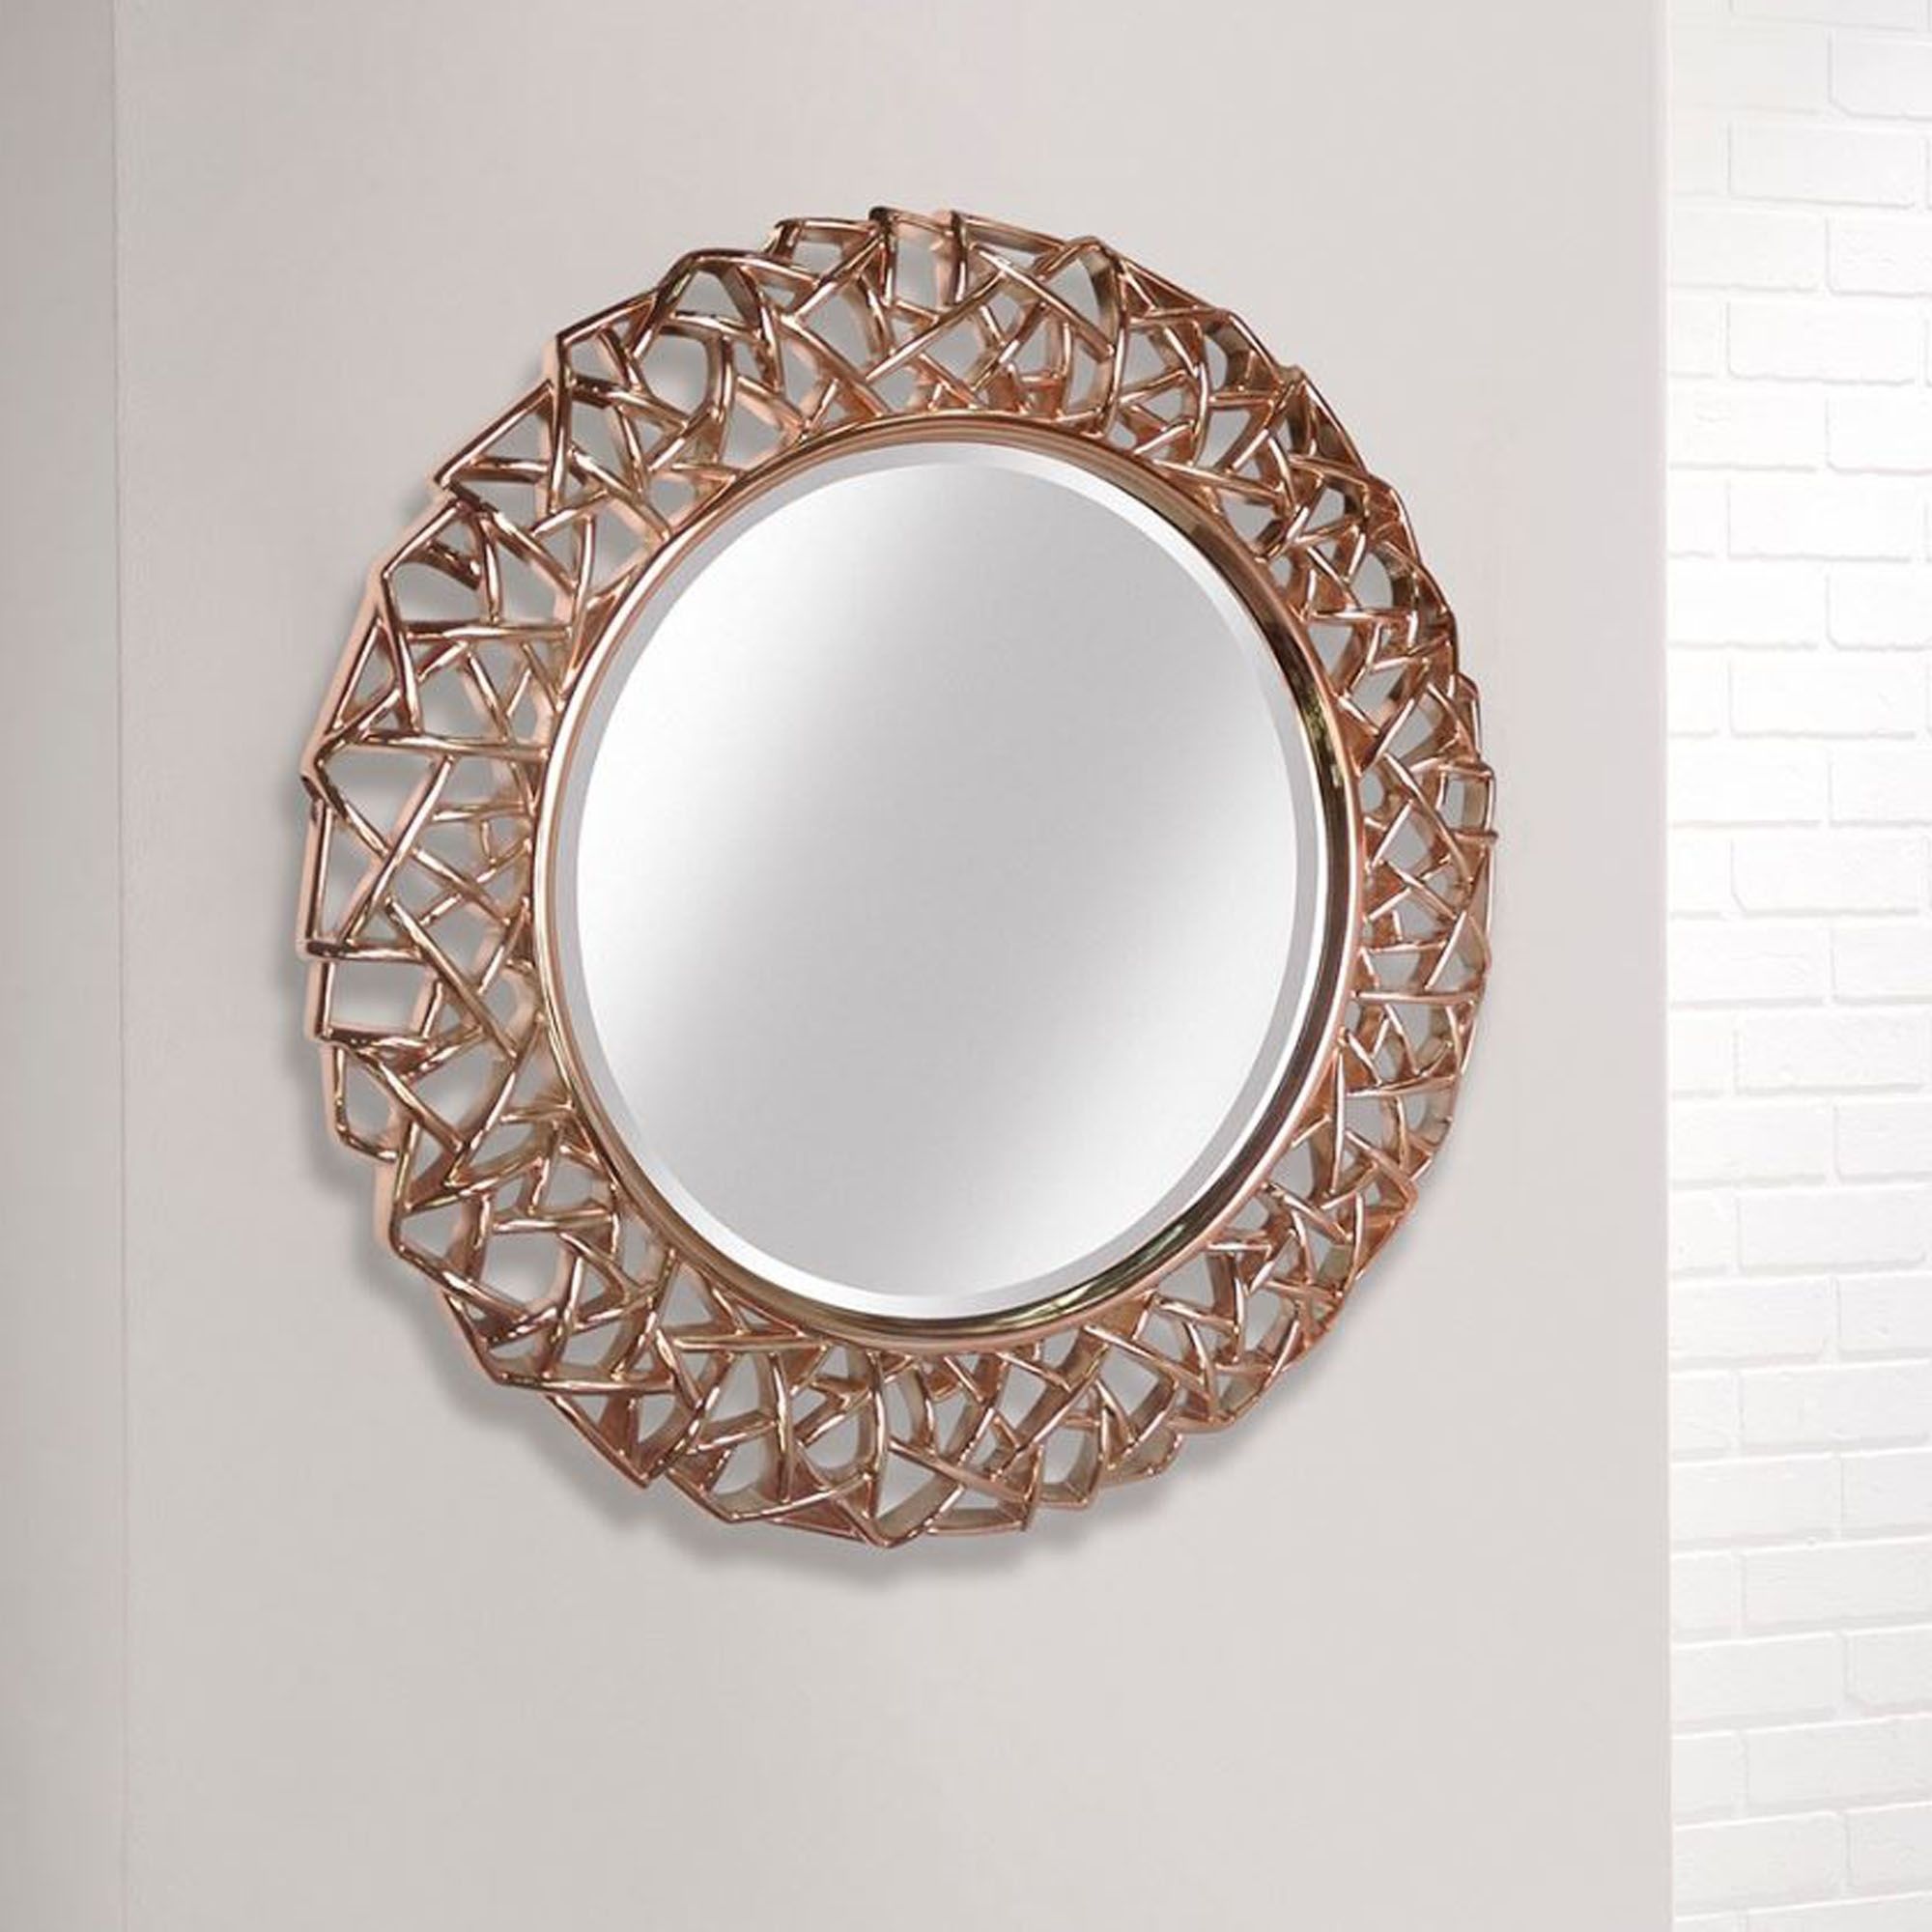 Intricate Rose Gold Round Modern Wall Mirror | Mirrors | Hd365 For Gold Decorative Wall Mirrors (View 8 of 15)